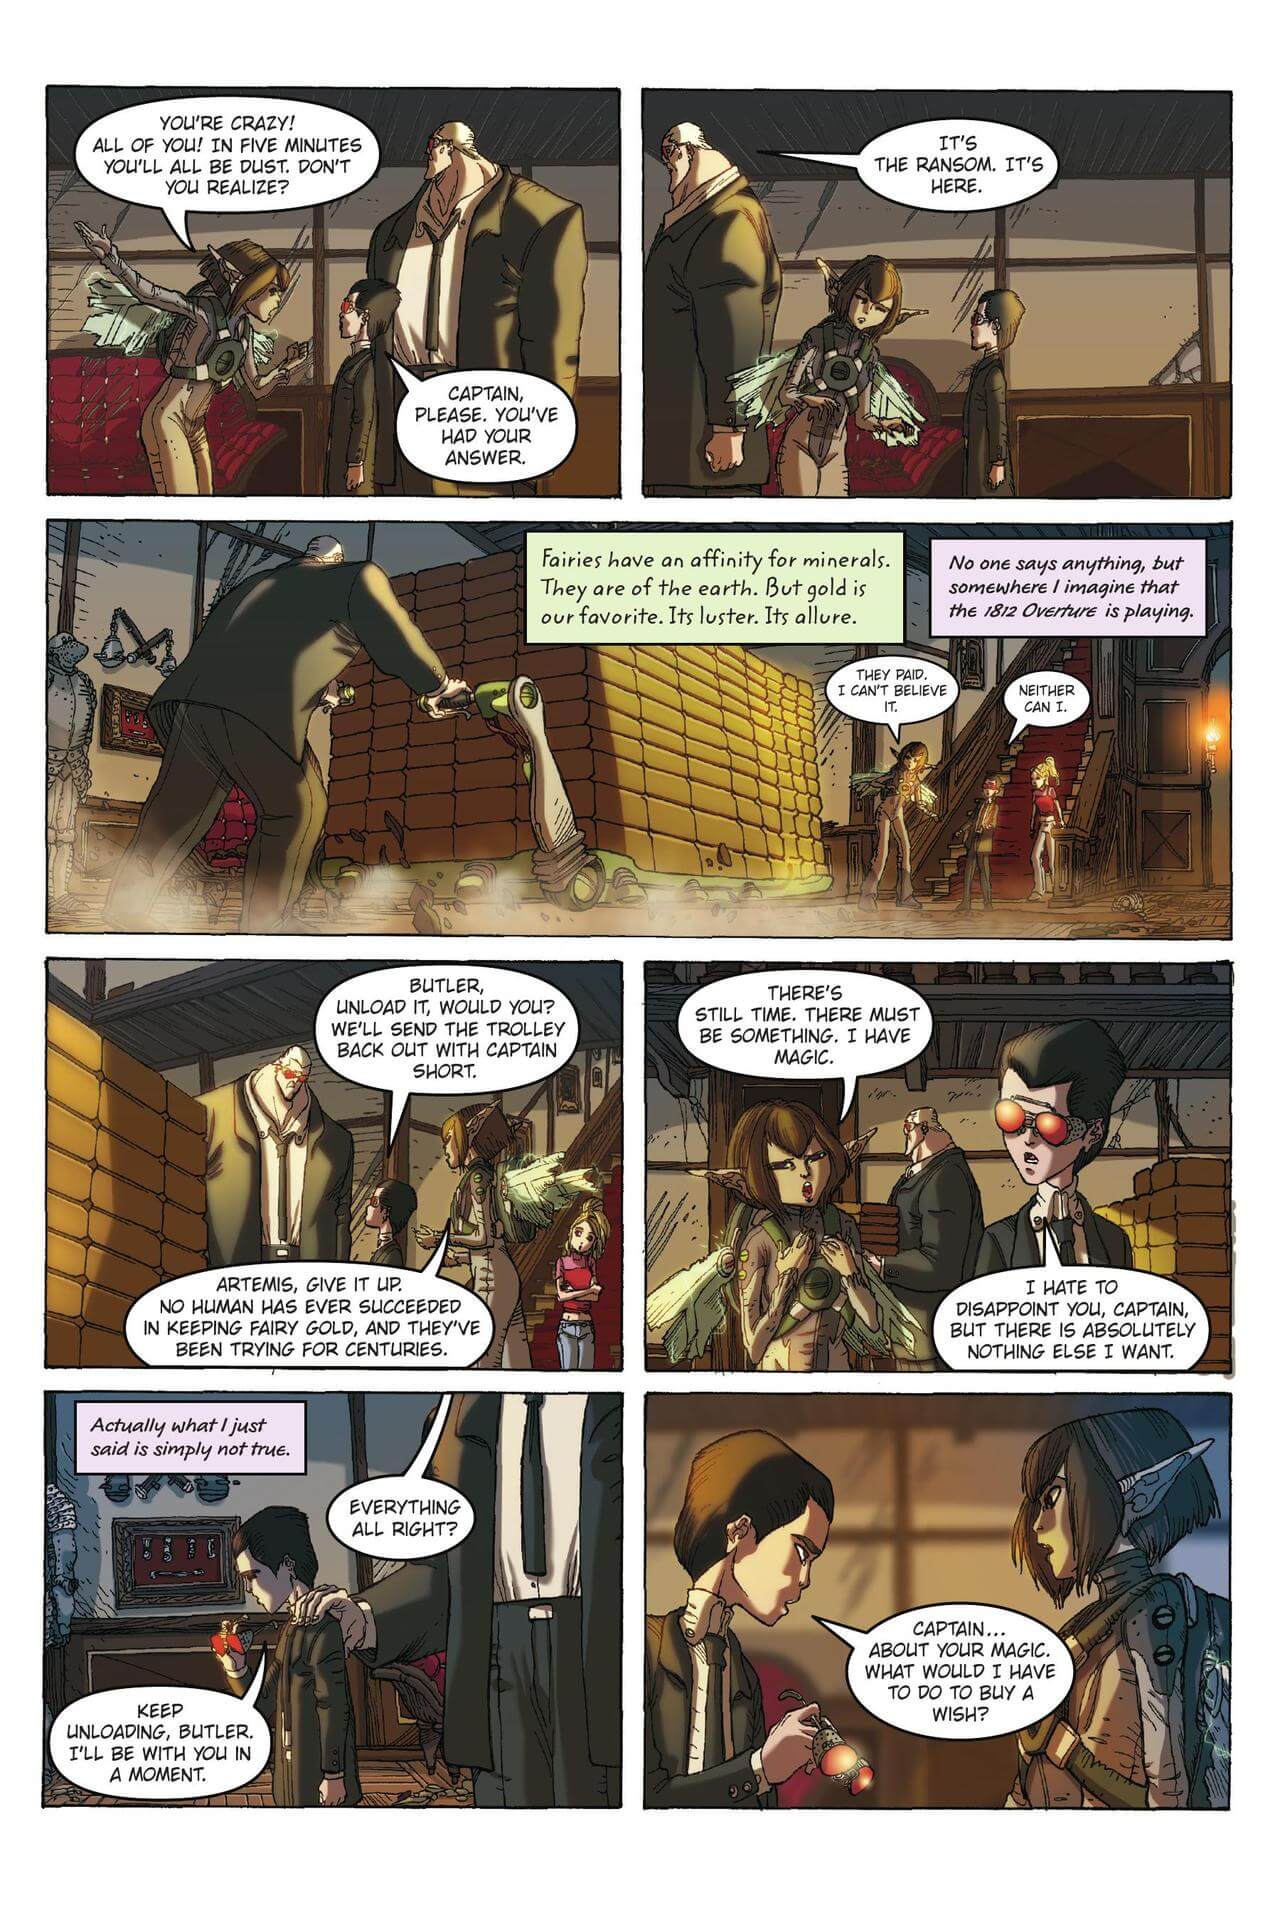 page 102 of artemis fowl the graphic novel